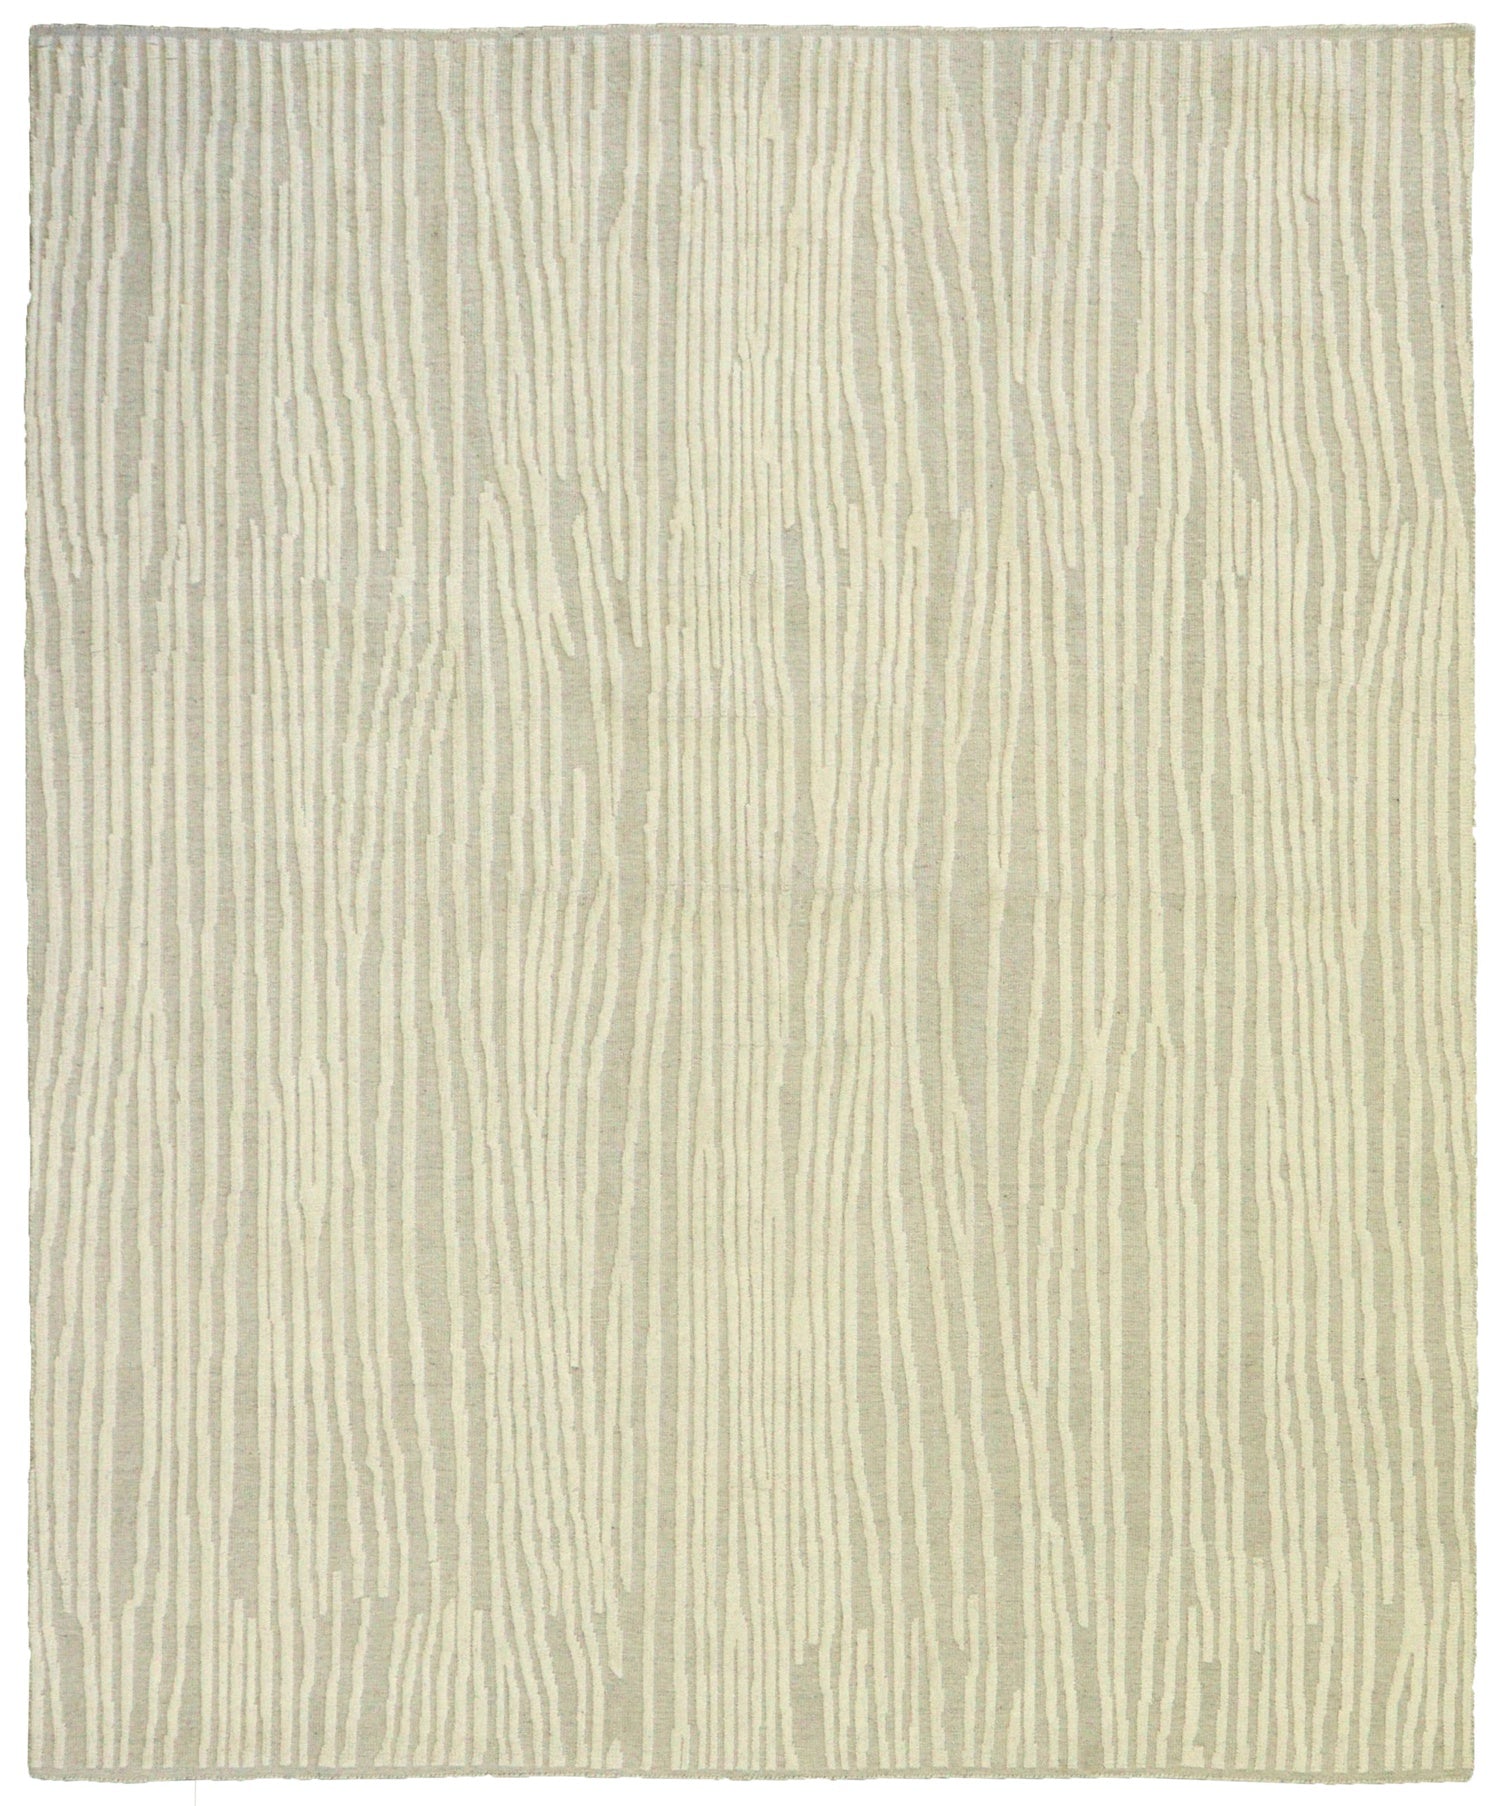 Thicket Handwoven Contemporary Rug